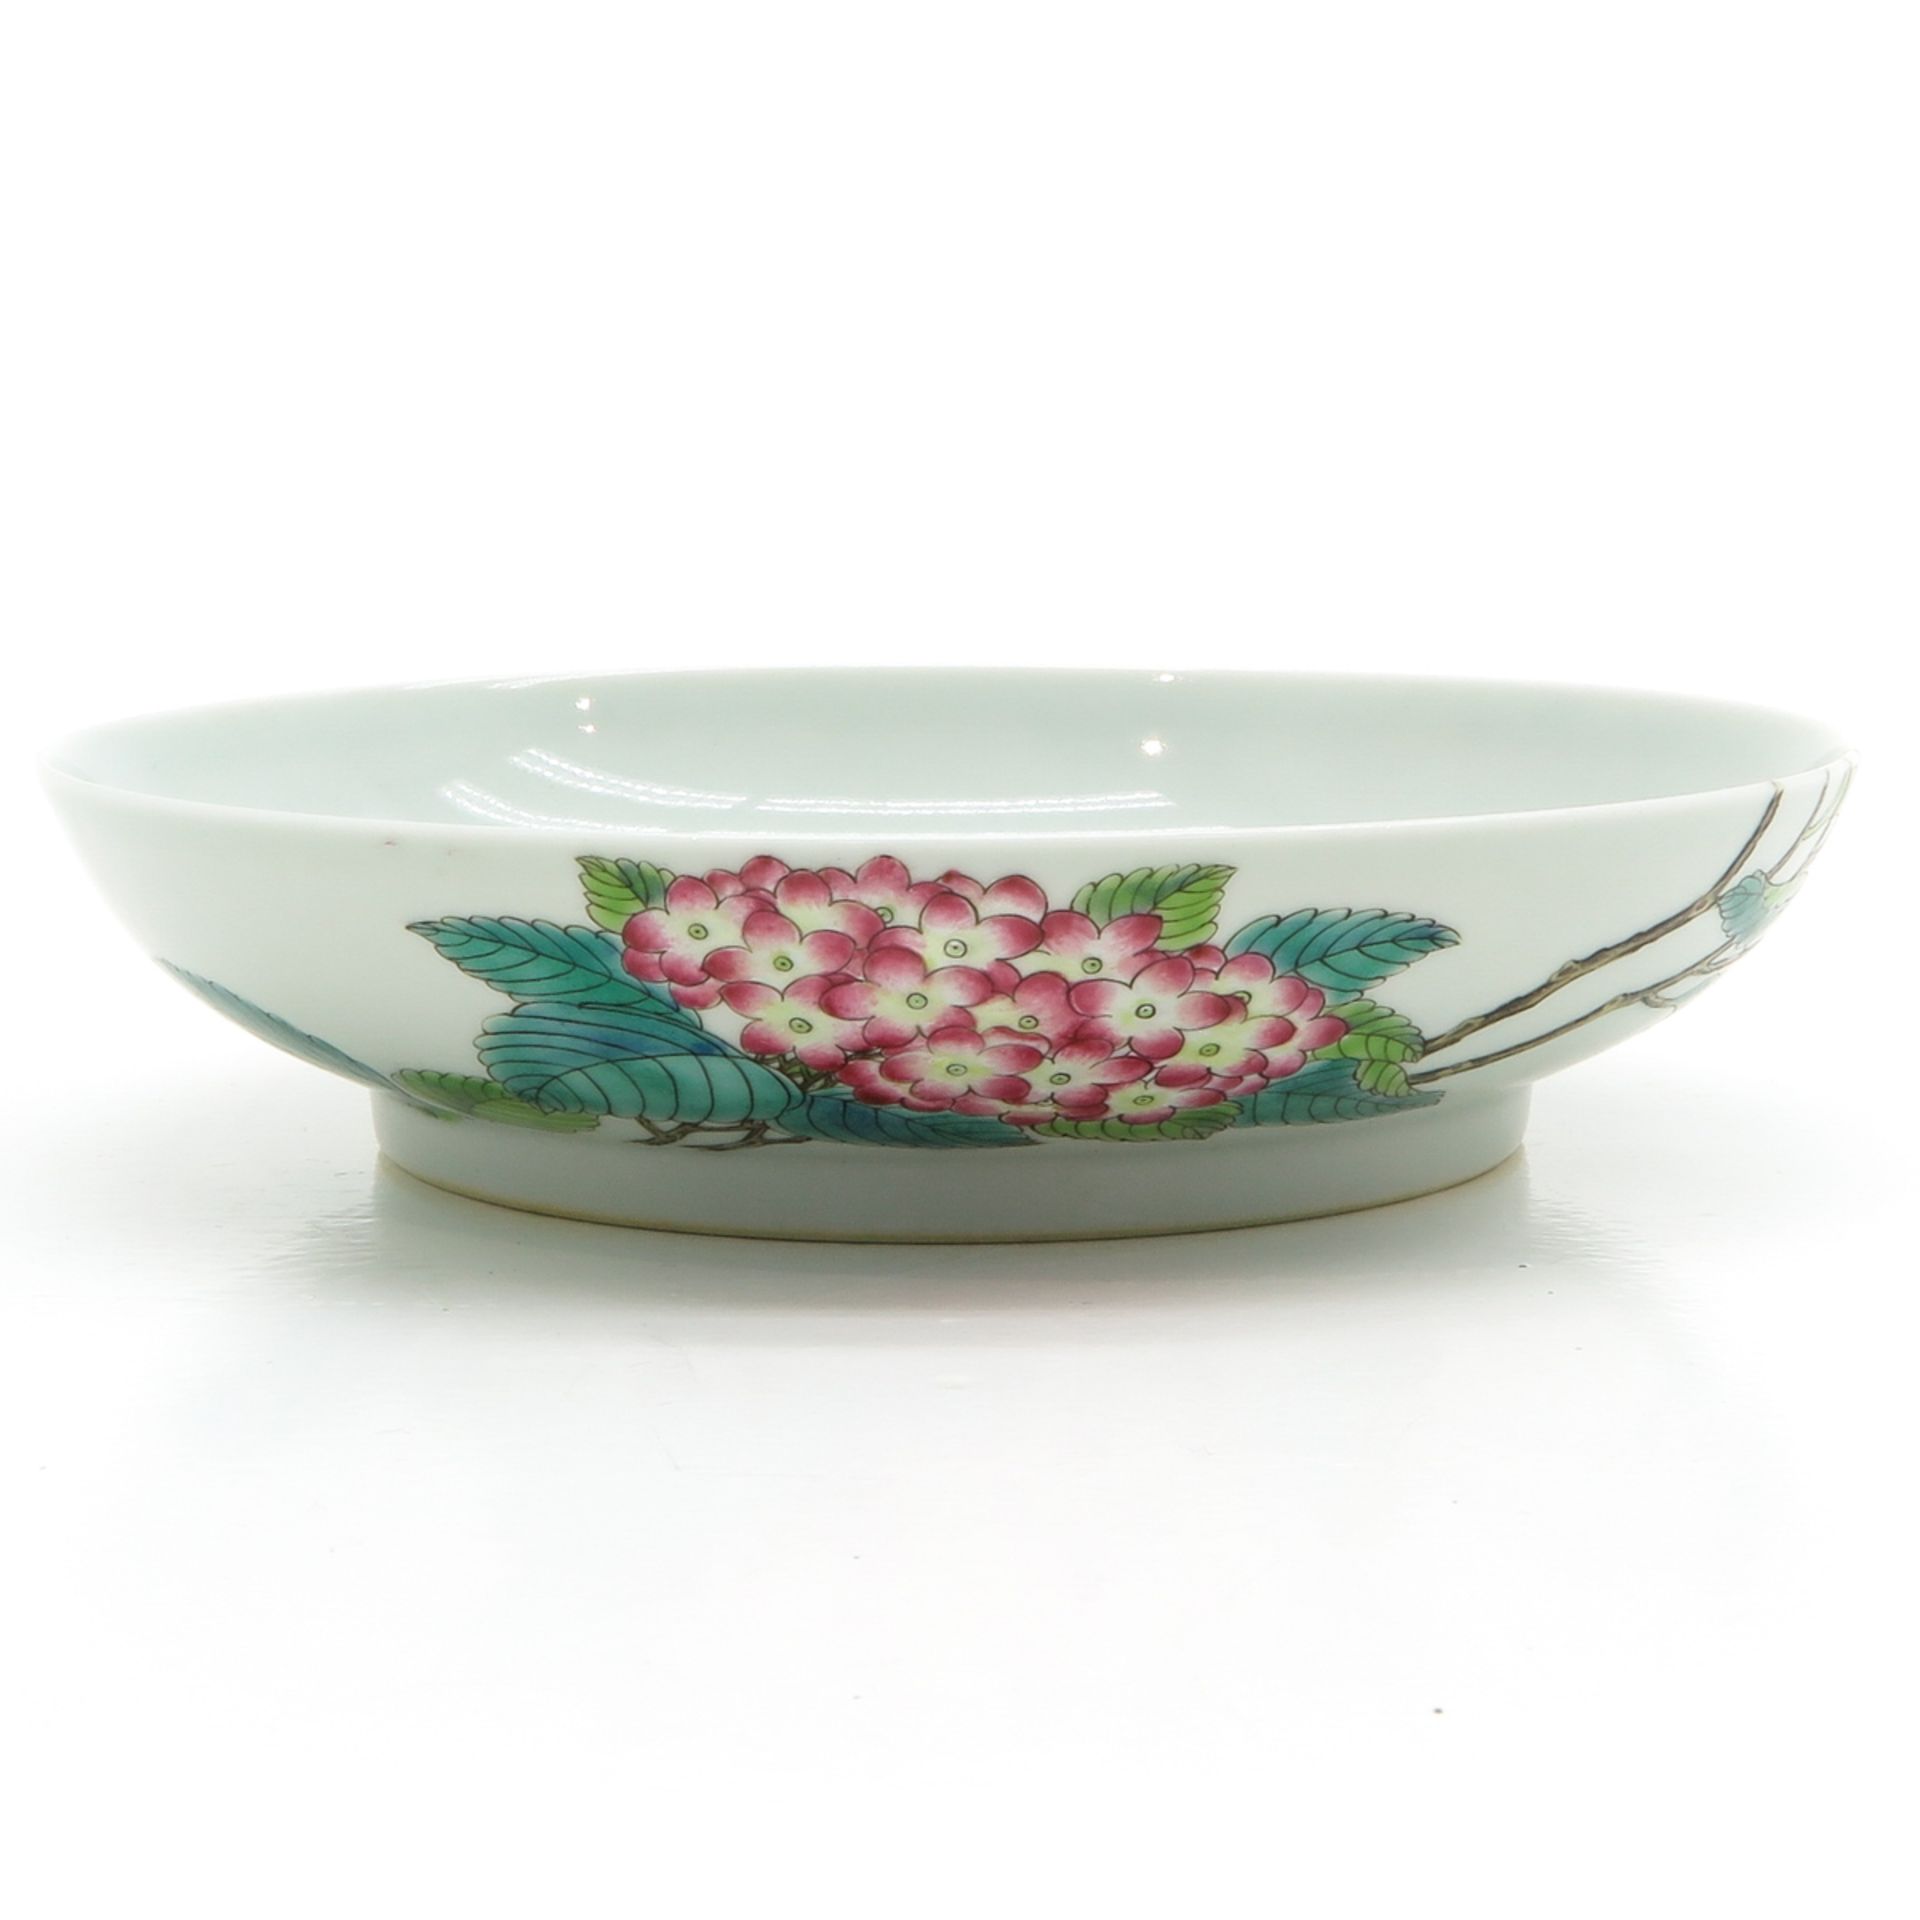 China Porcelain Plate Depicting Flowers and Butterflies